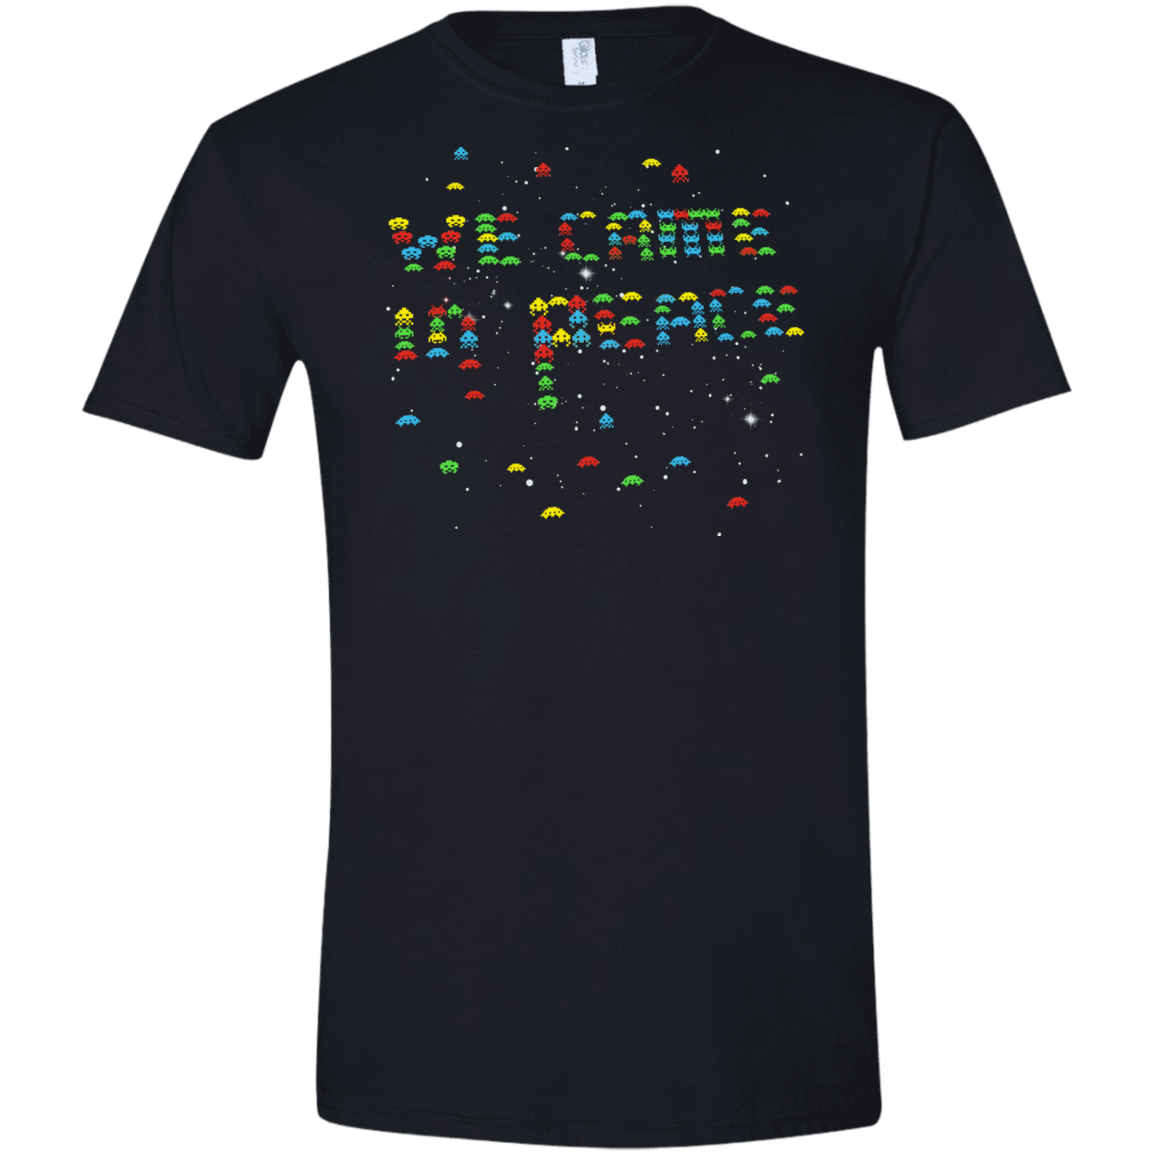 We came in peace Men's Semi-Fitted Softstyle